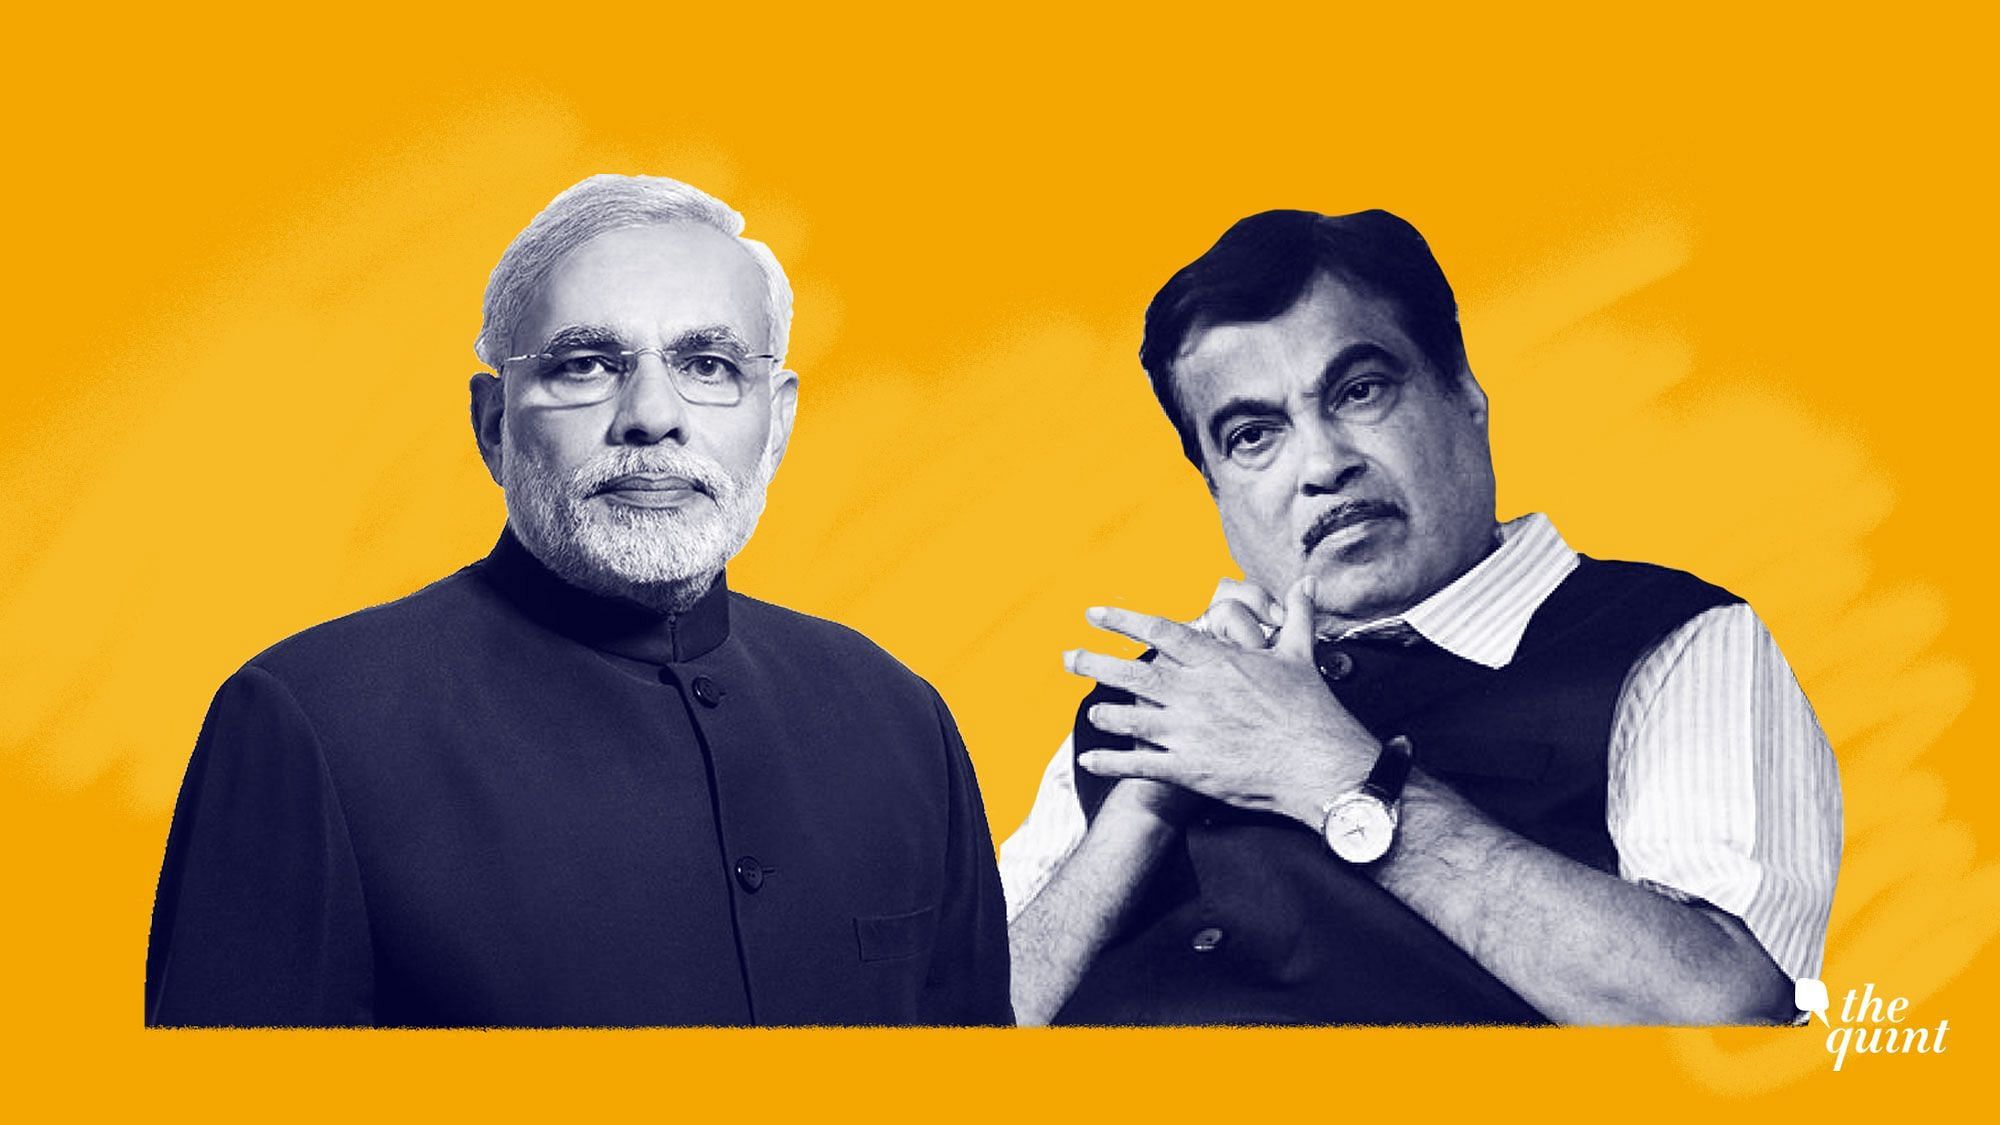 Ahead of 2019 Lok Sabha elections, Union minister Nitin Gadkari on Friday, 1 March, clarified he is not in the race for the post of prime minister.